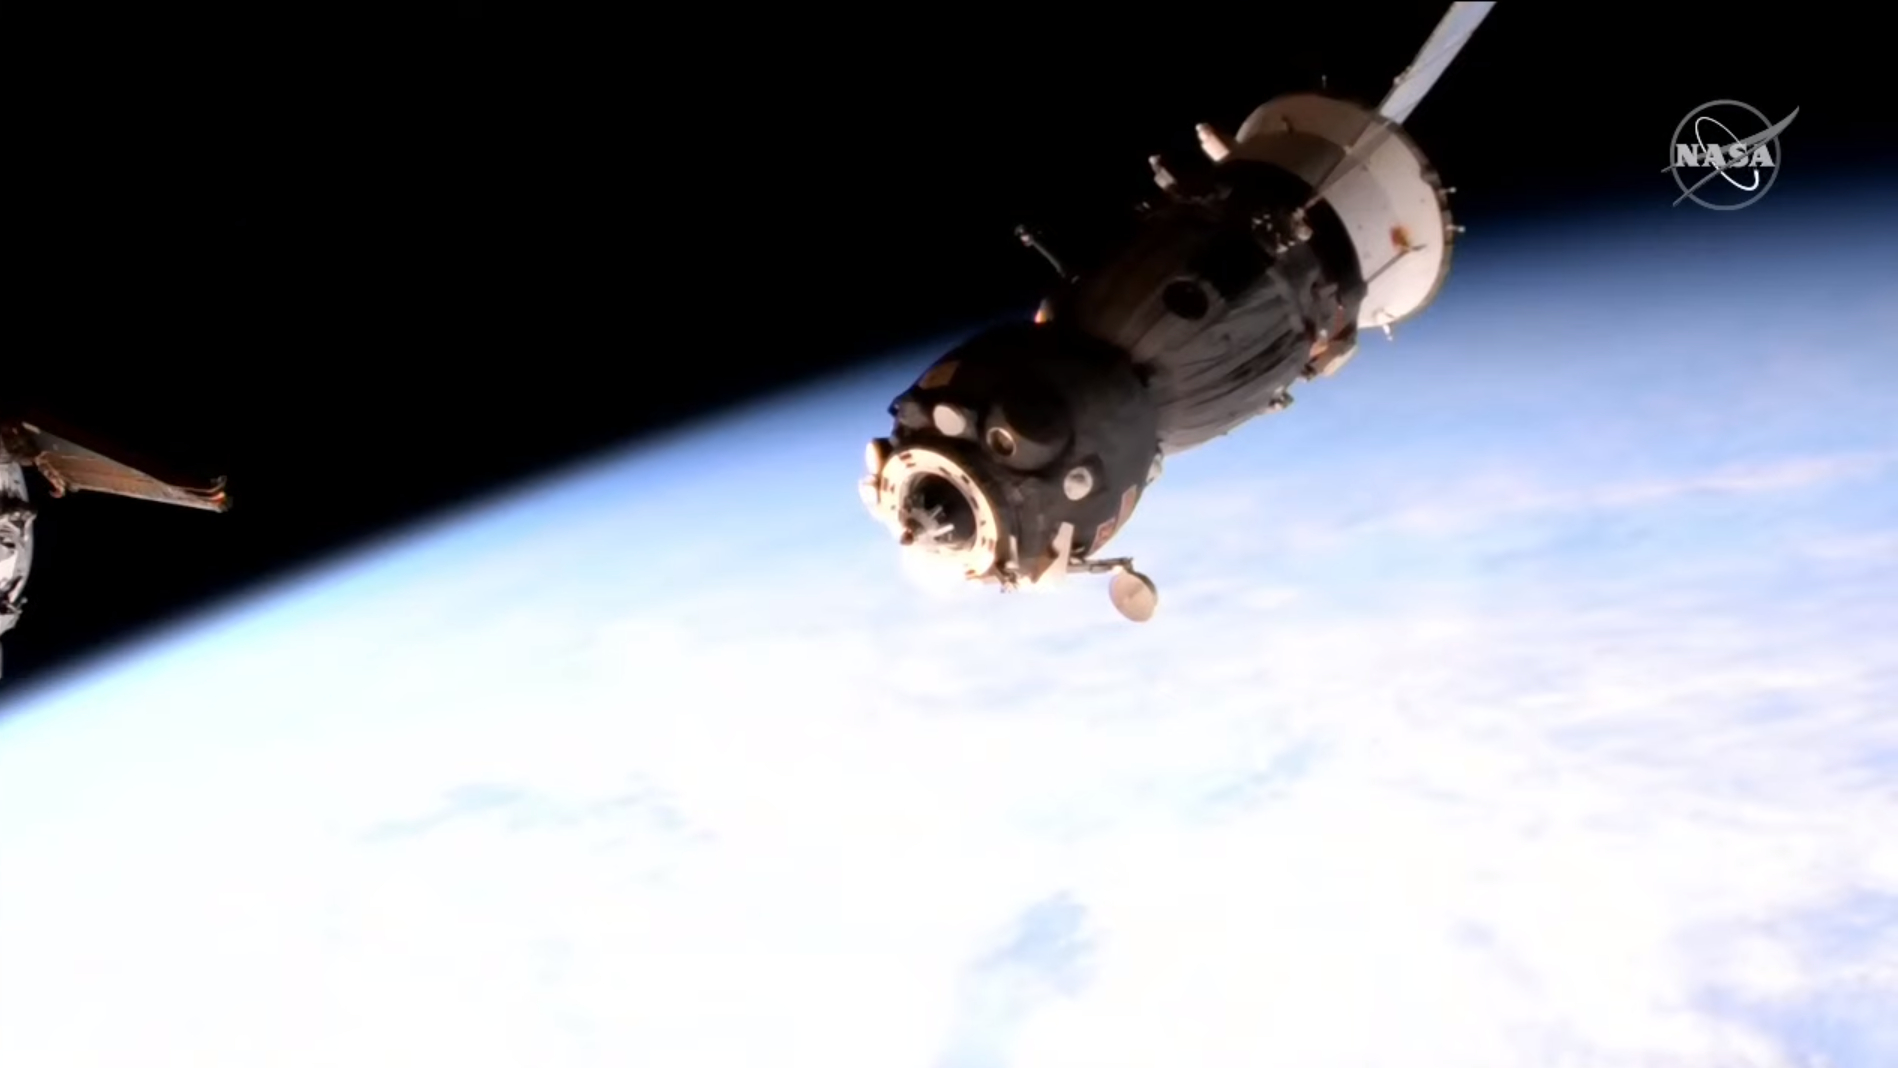 Leaky Soyuz spacecraft departs space station and returns to Earth in speedy landing thumbnail